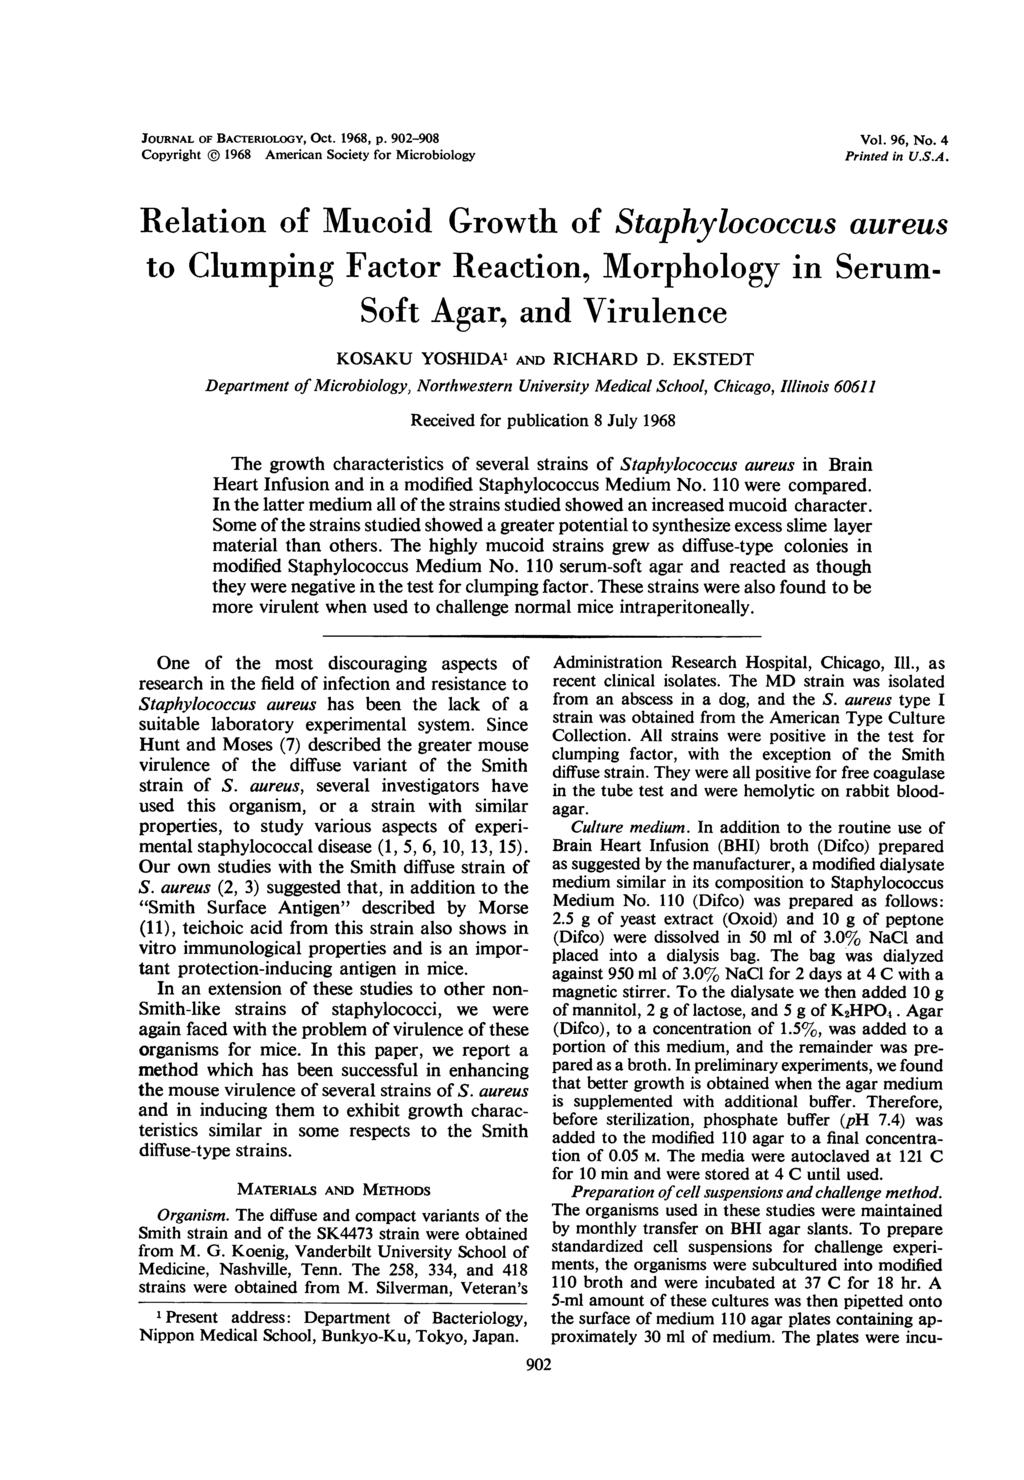 JOURNAL OF BACTERIOLOGY, OCt. 1968, p. 902-908 Copyright @ 1968 American Society for Microbiology Vol. 96, No. 4 Printed in U.S.A. Relation of Mucoid Growth of Staphylococcus aureus to Clumping Factor Reaction, Morphology in Serum- Soft Agar, and Virulence KOSAKU YOSHIDA1 AND RICHARD D.